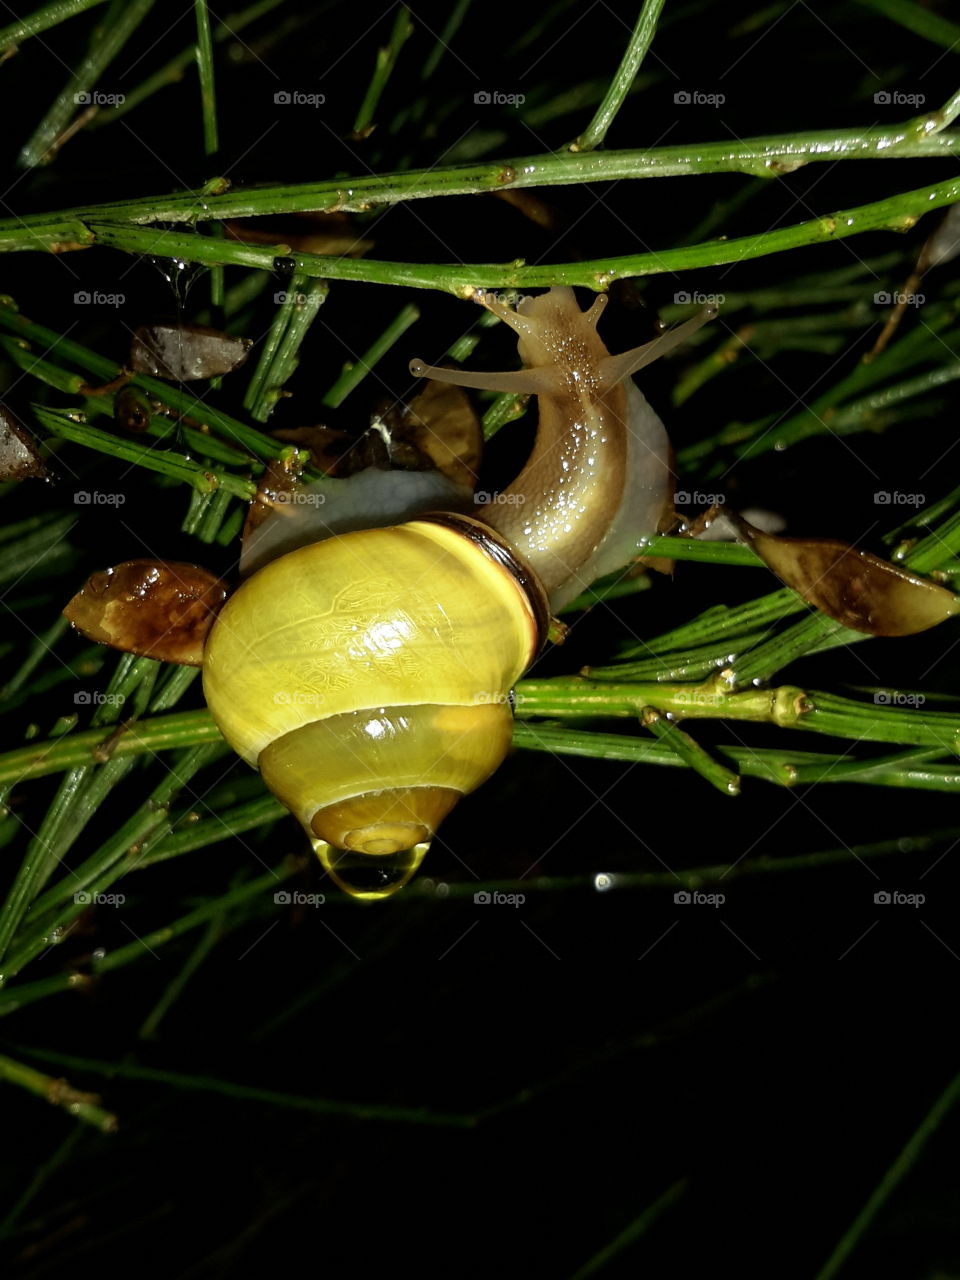 Snail and drop in the dark